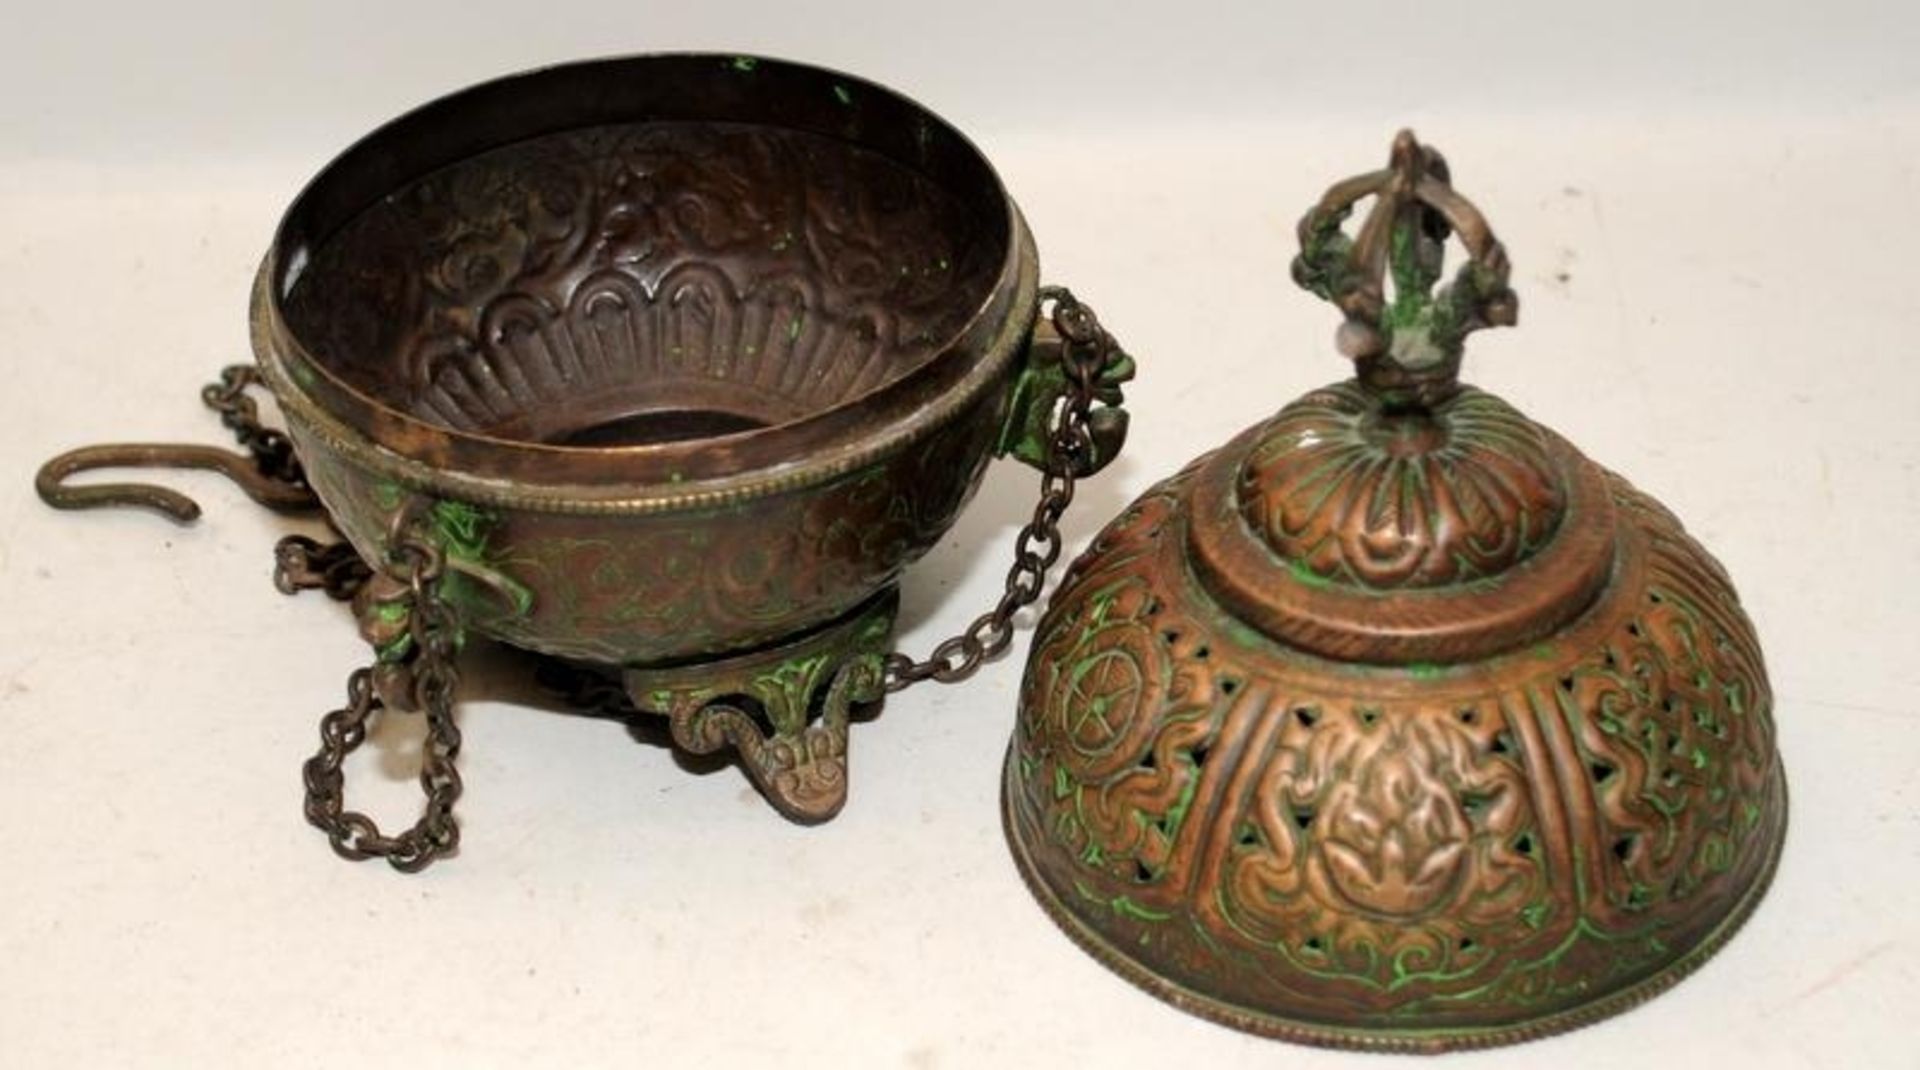 Two antique incense burners, one possibly Tibetan of brass construction and one Chinese of stone/ - Image 3 of 6